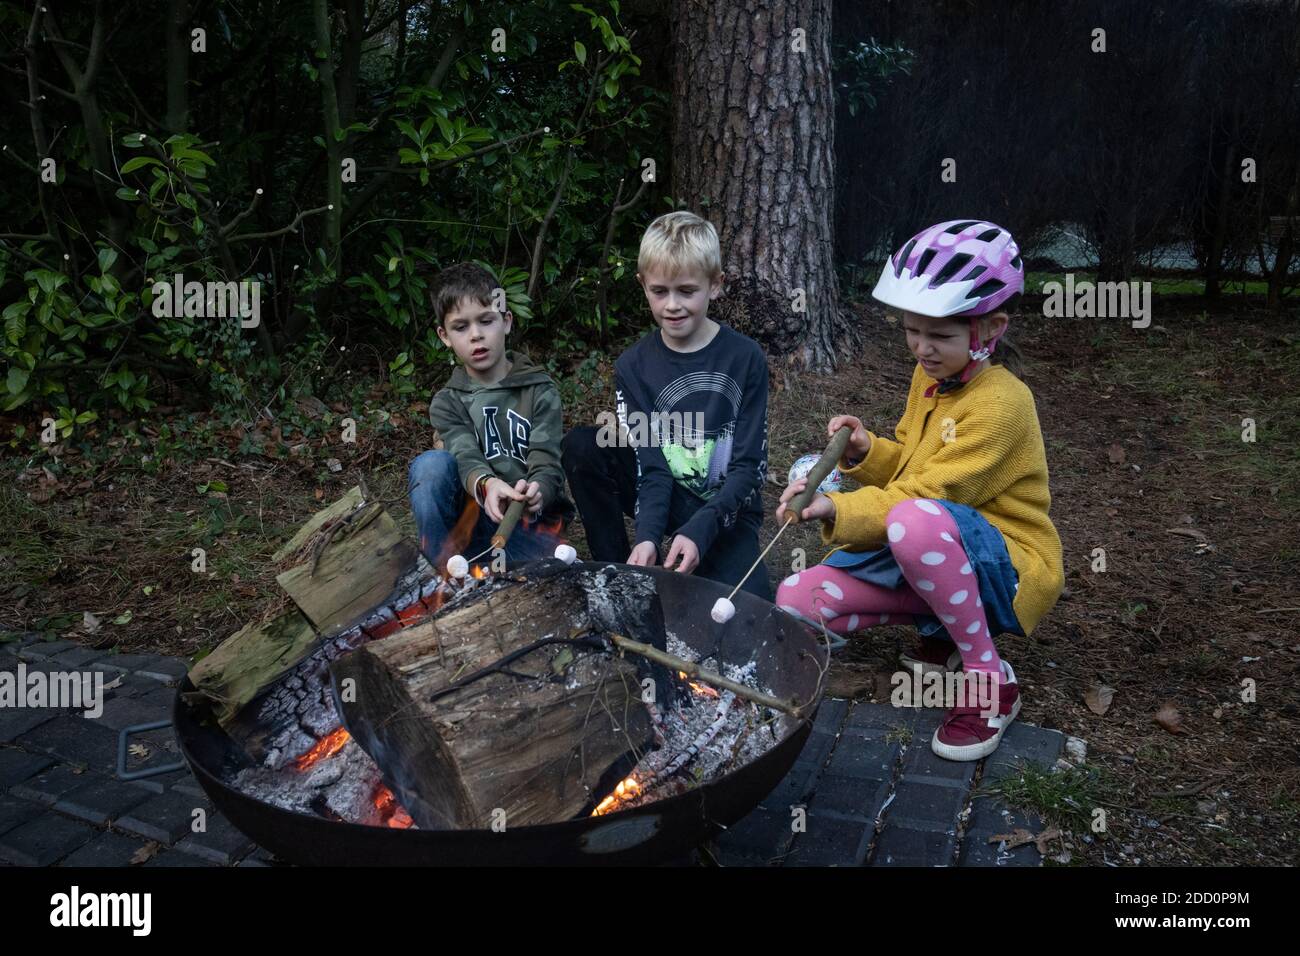 Children outdoors roasting marshmallows over the wood fire, England, United Kingdom Stock Photo